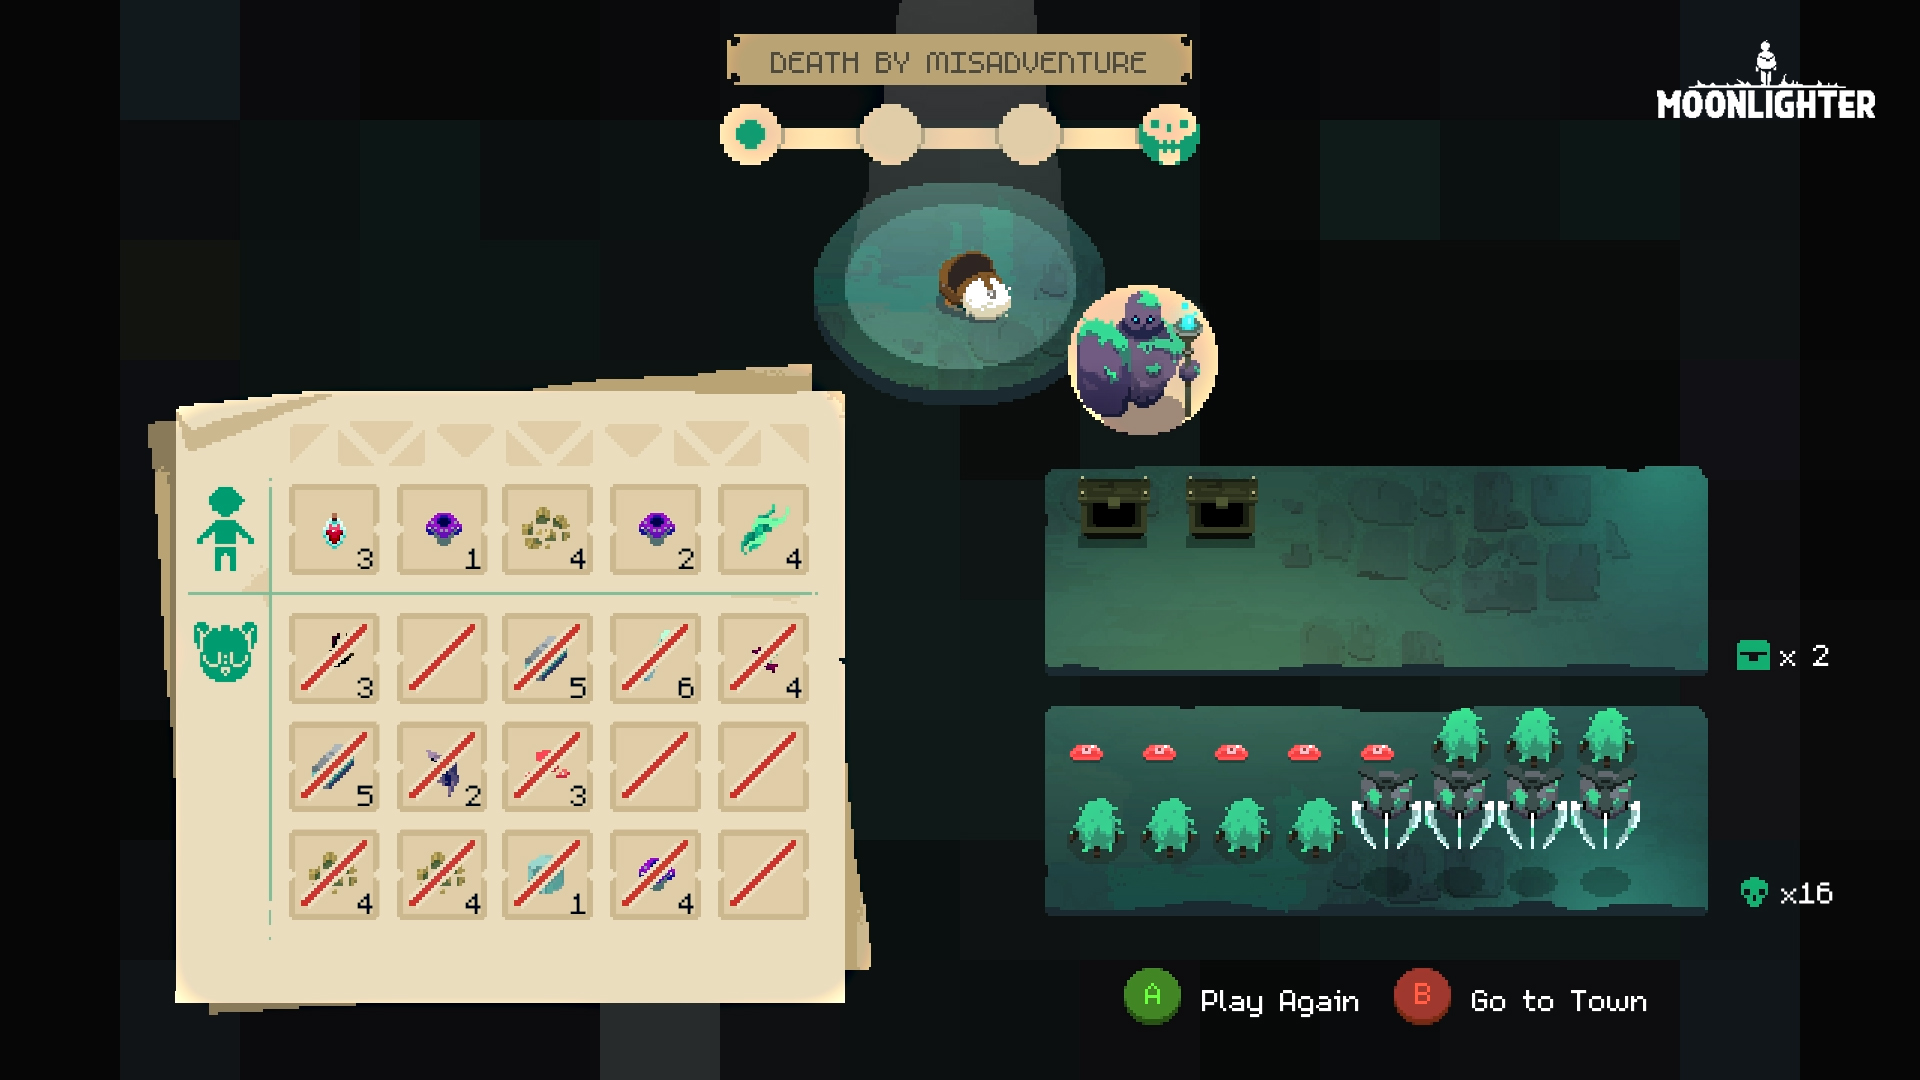 Moonlighter Review - Fire Sale 5